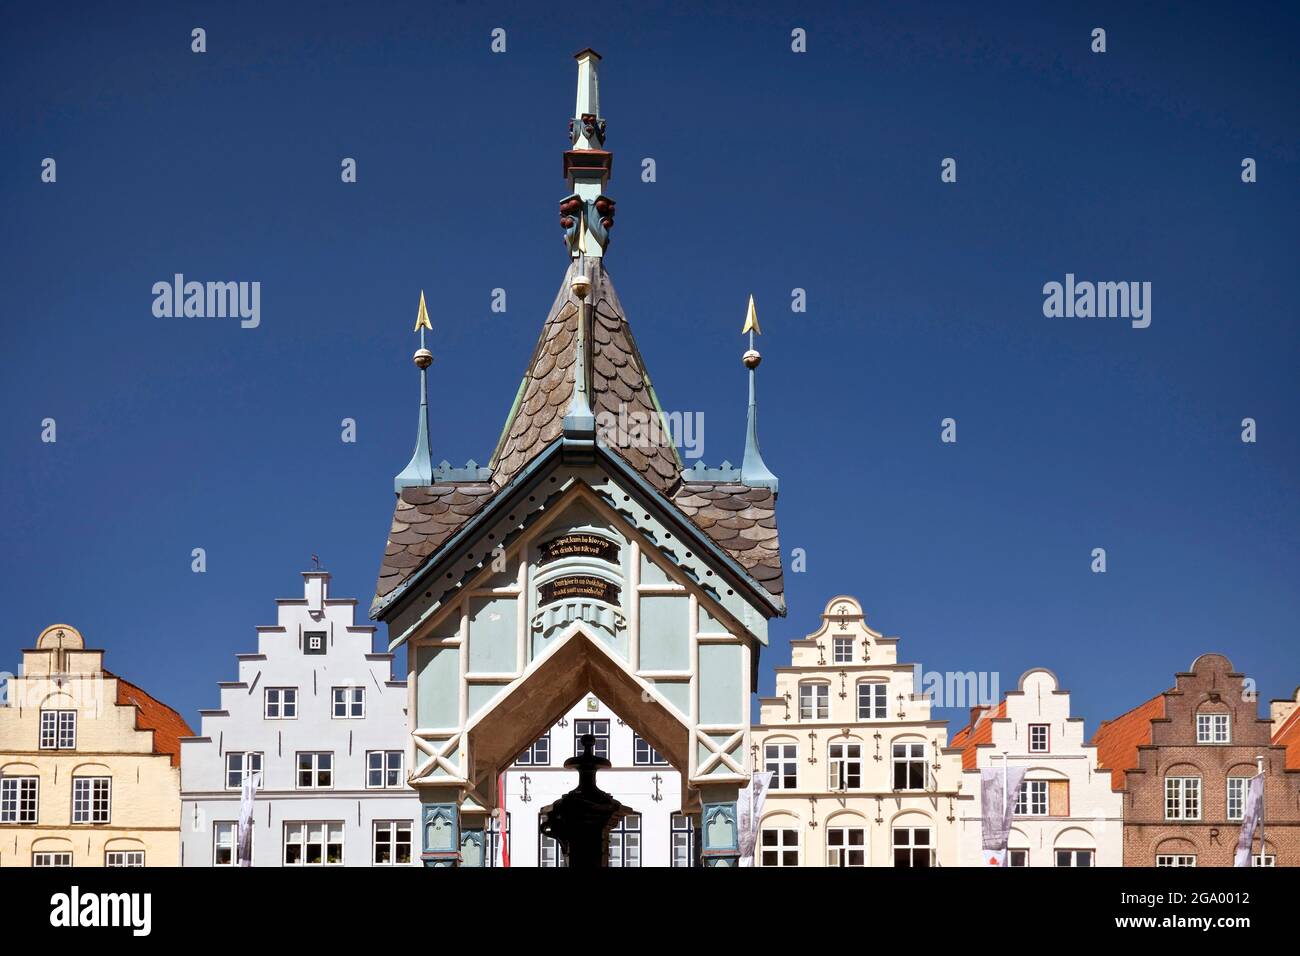 historic well house at the market place in front of gabled houses, Germany, Schleswig-Holstein, Northern Frisia, Friedrichstadt Stock Photo